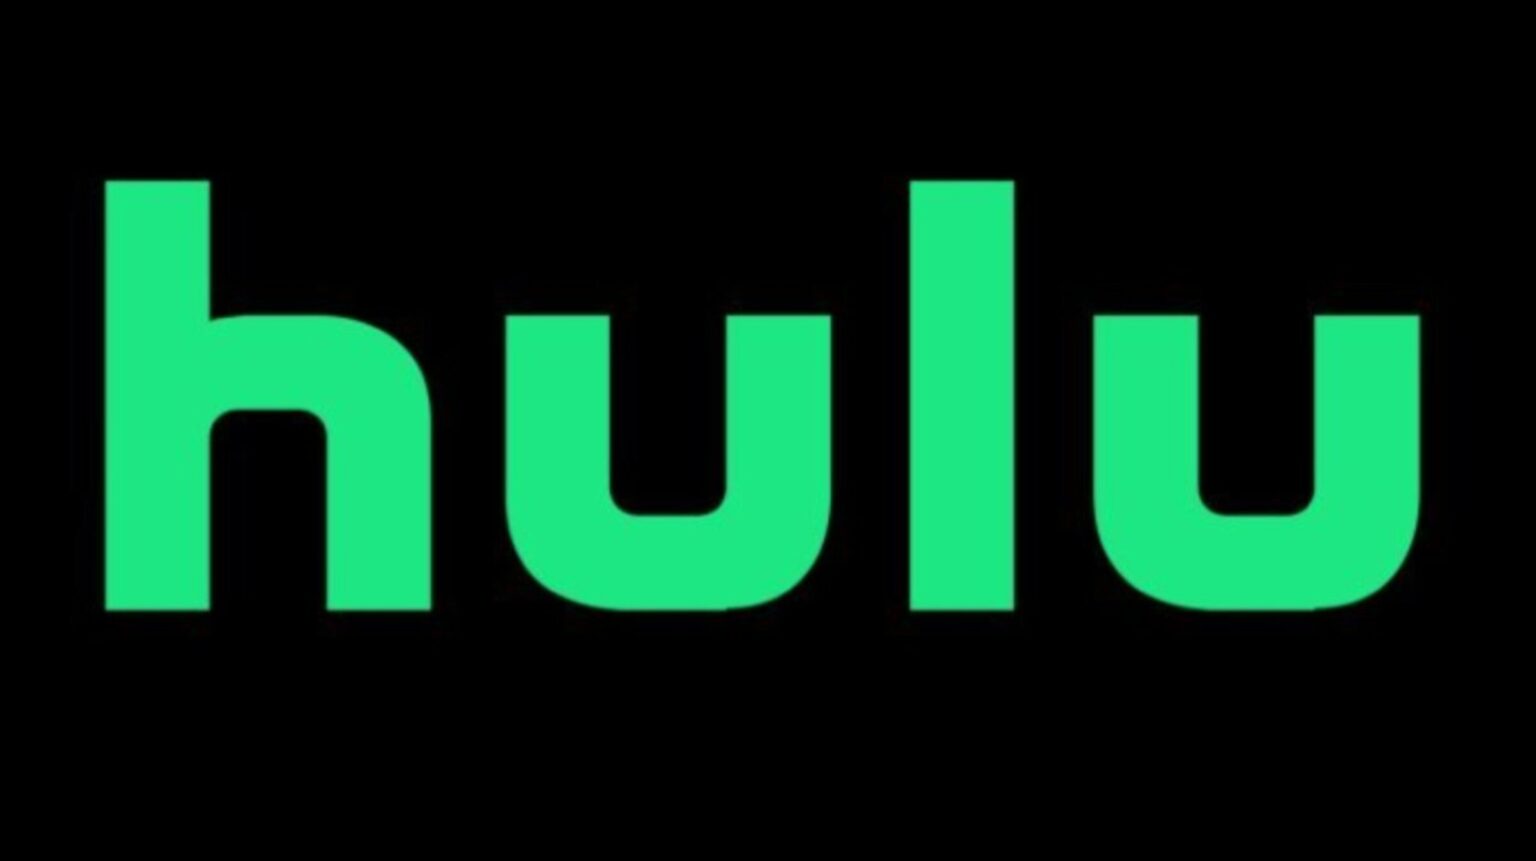 Looking for a movie to watch on Hulu? Make the best out of streaming. Stay home in your pajamas, eat whatever you want. These Hulu originals should be on everyone's watchlist.